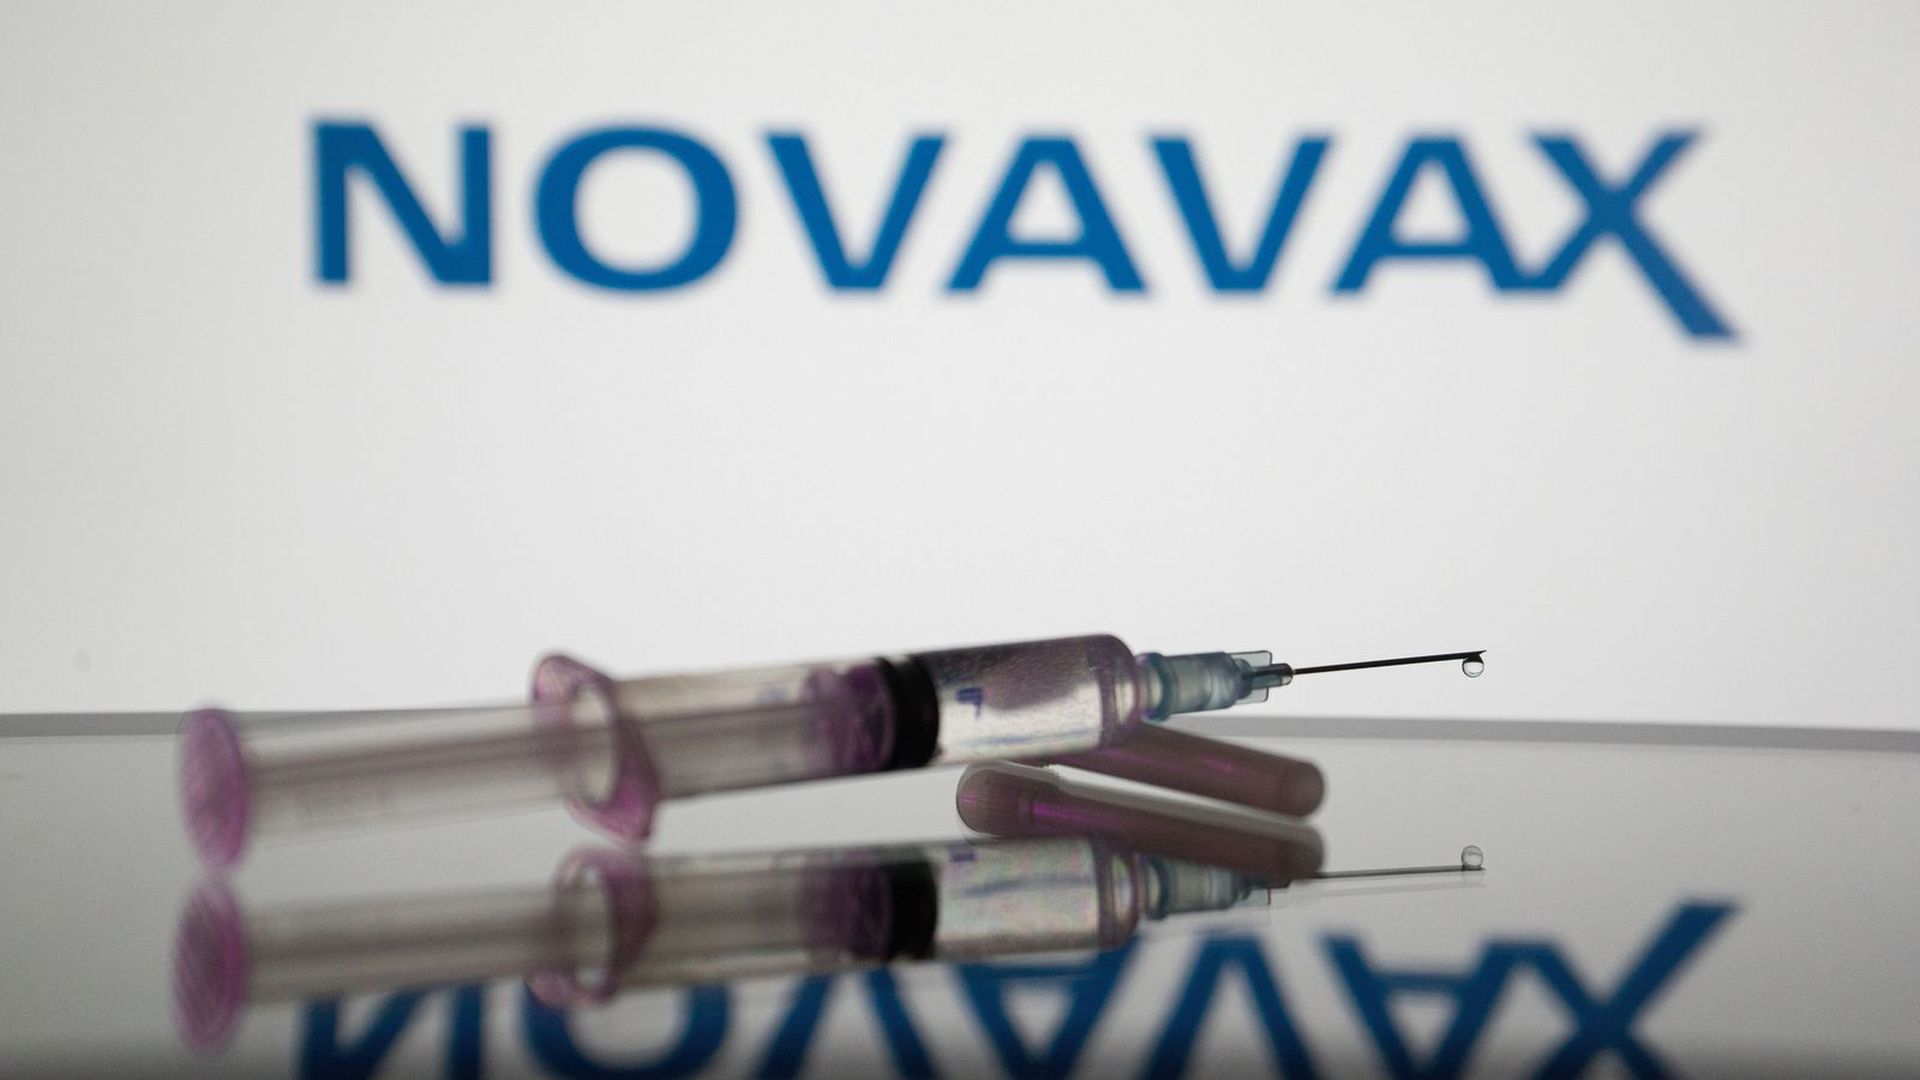 A syringe with the Novavax logo in the background.